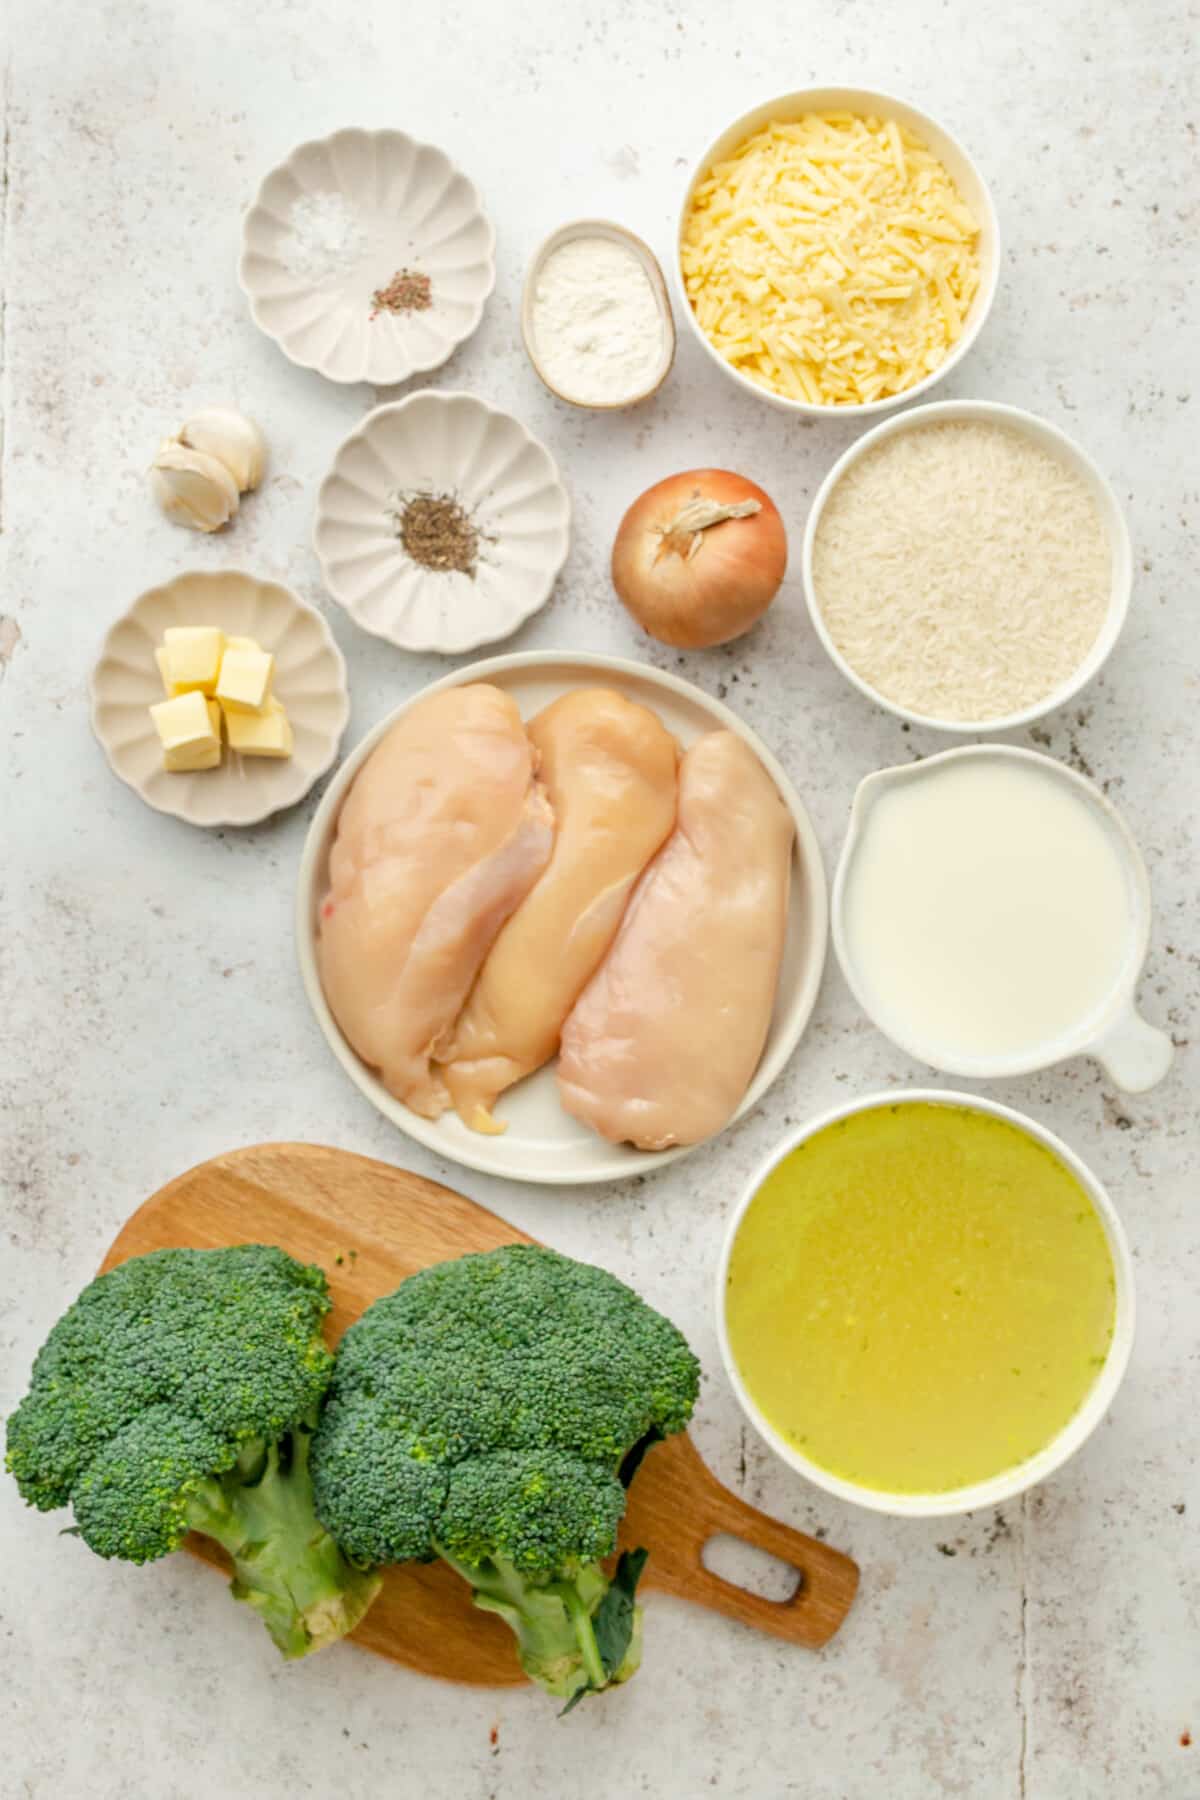 Ingredients for chicken broccoli and rice casserole sit in a variety of bowls and plates on a light grey surface.